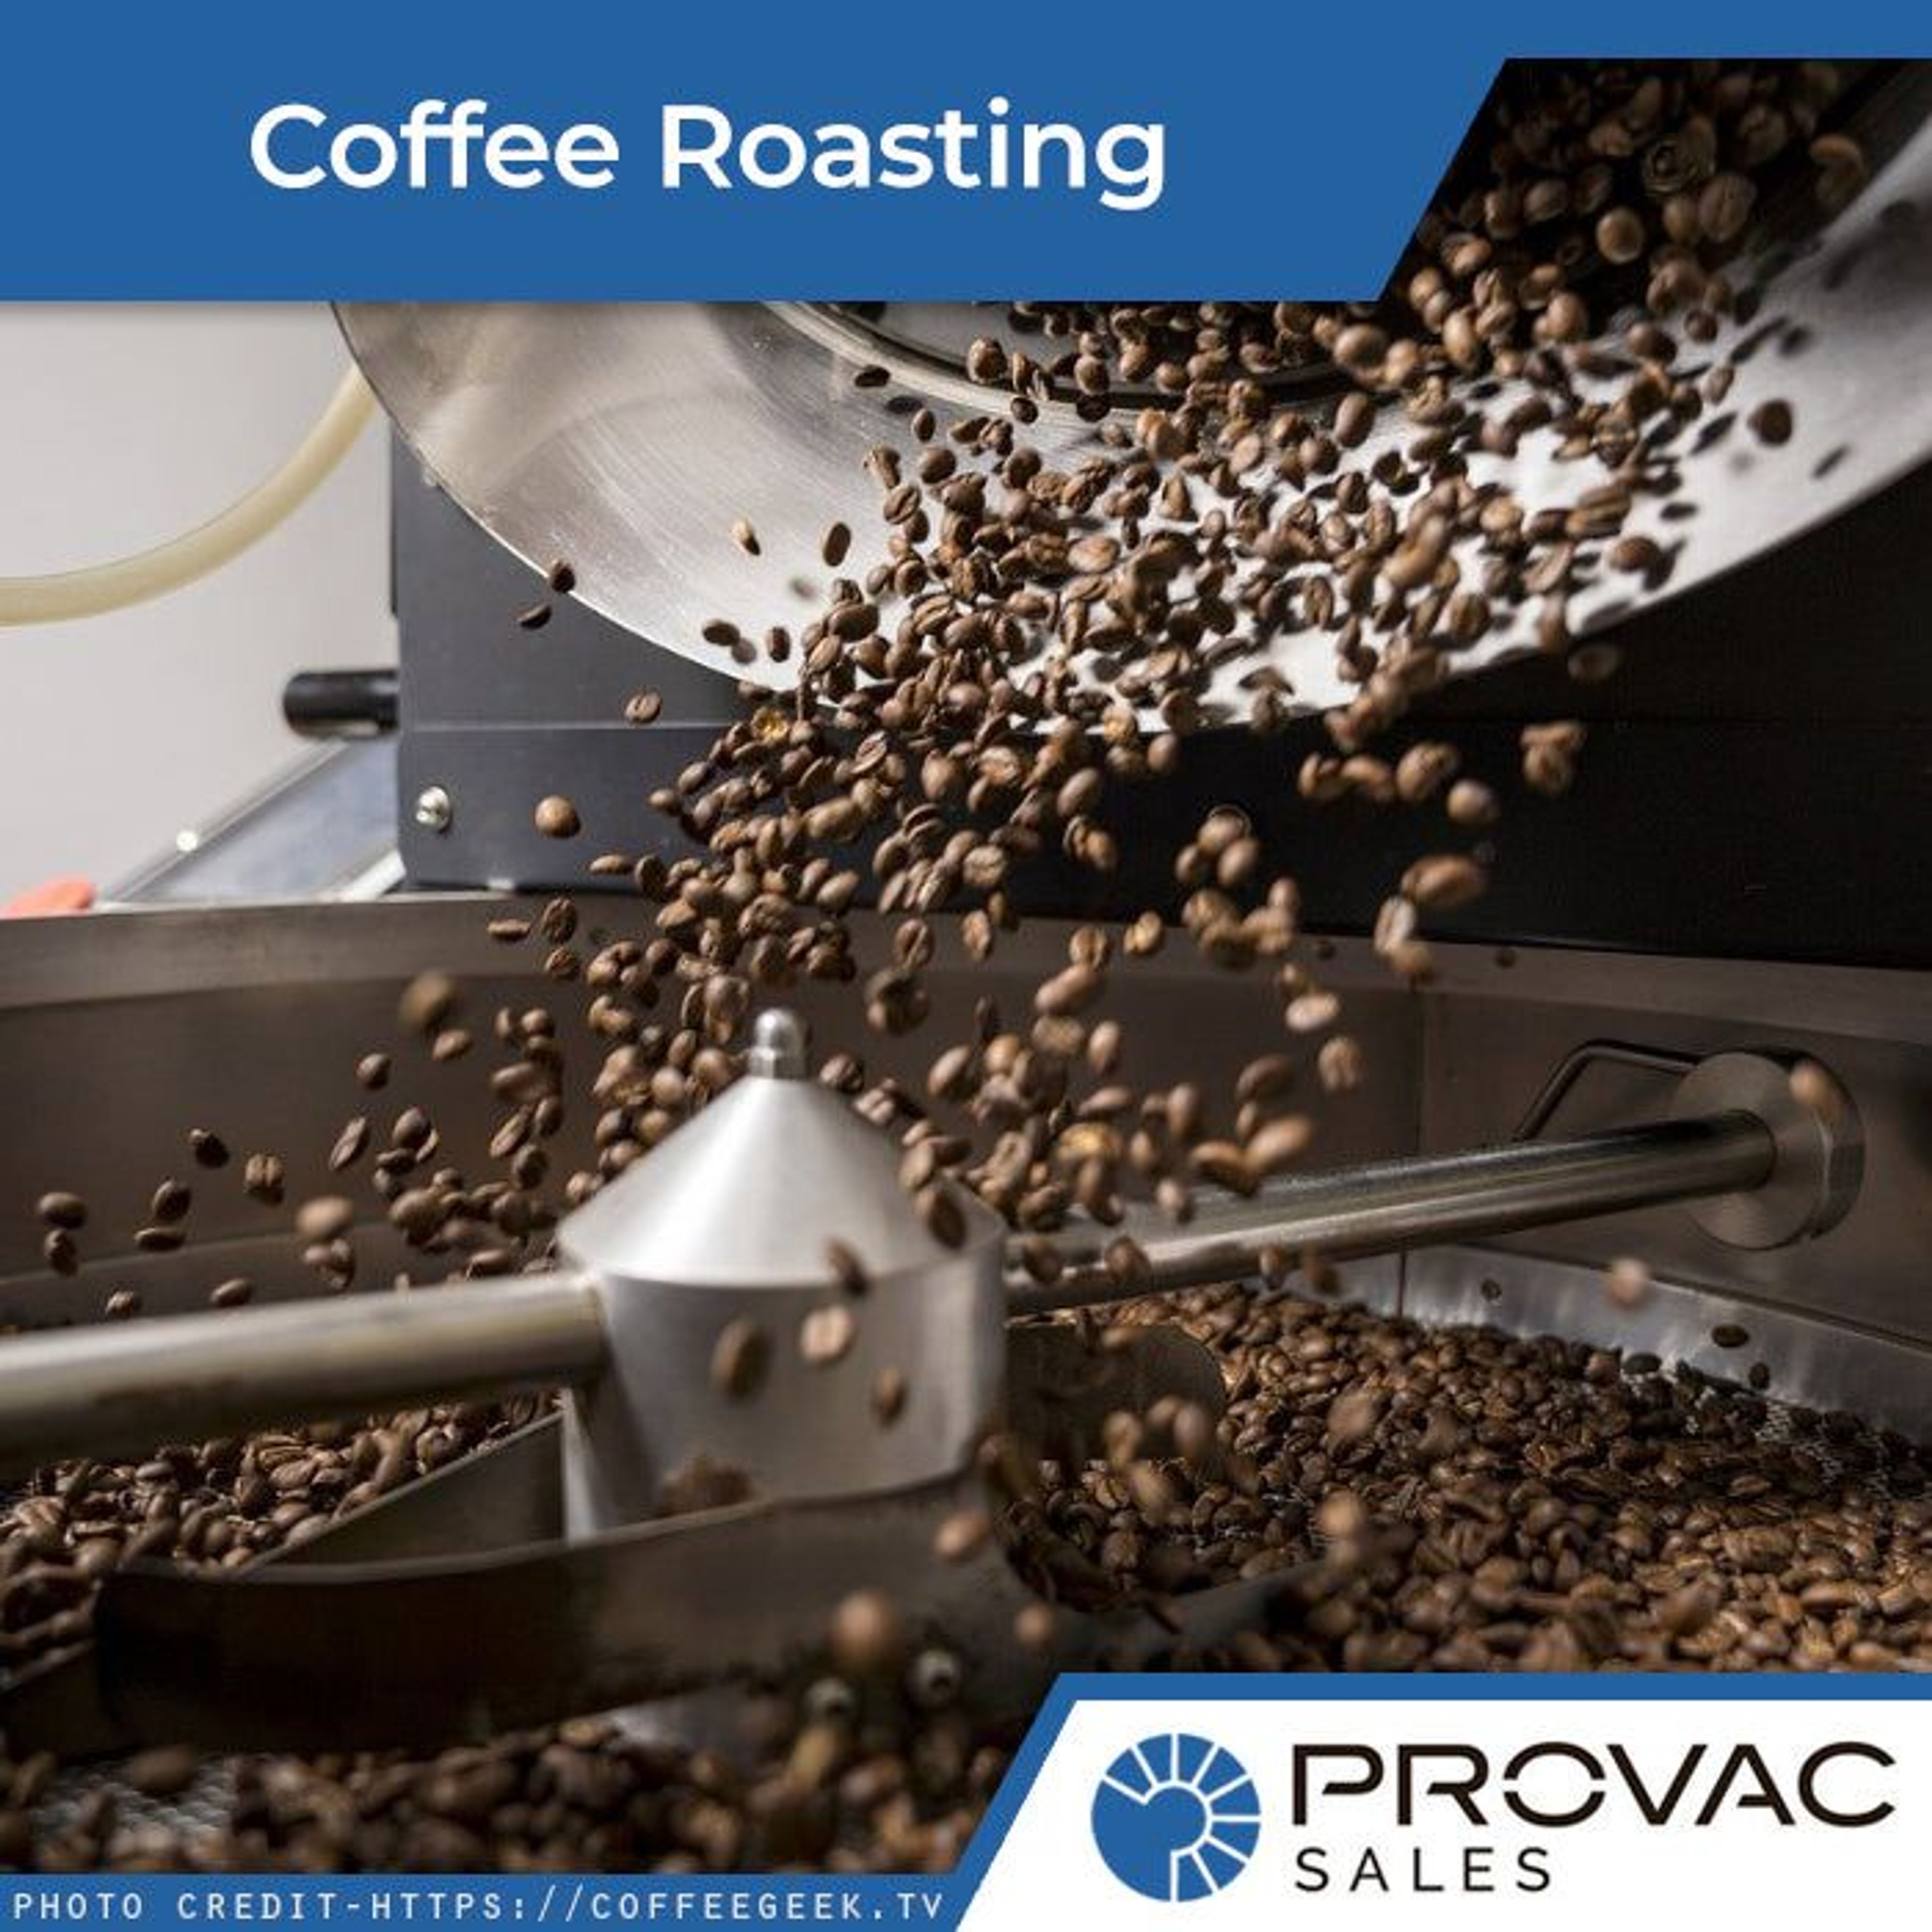 How Vacuum Pumps Assist During The Coffee Roasting Process Background